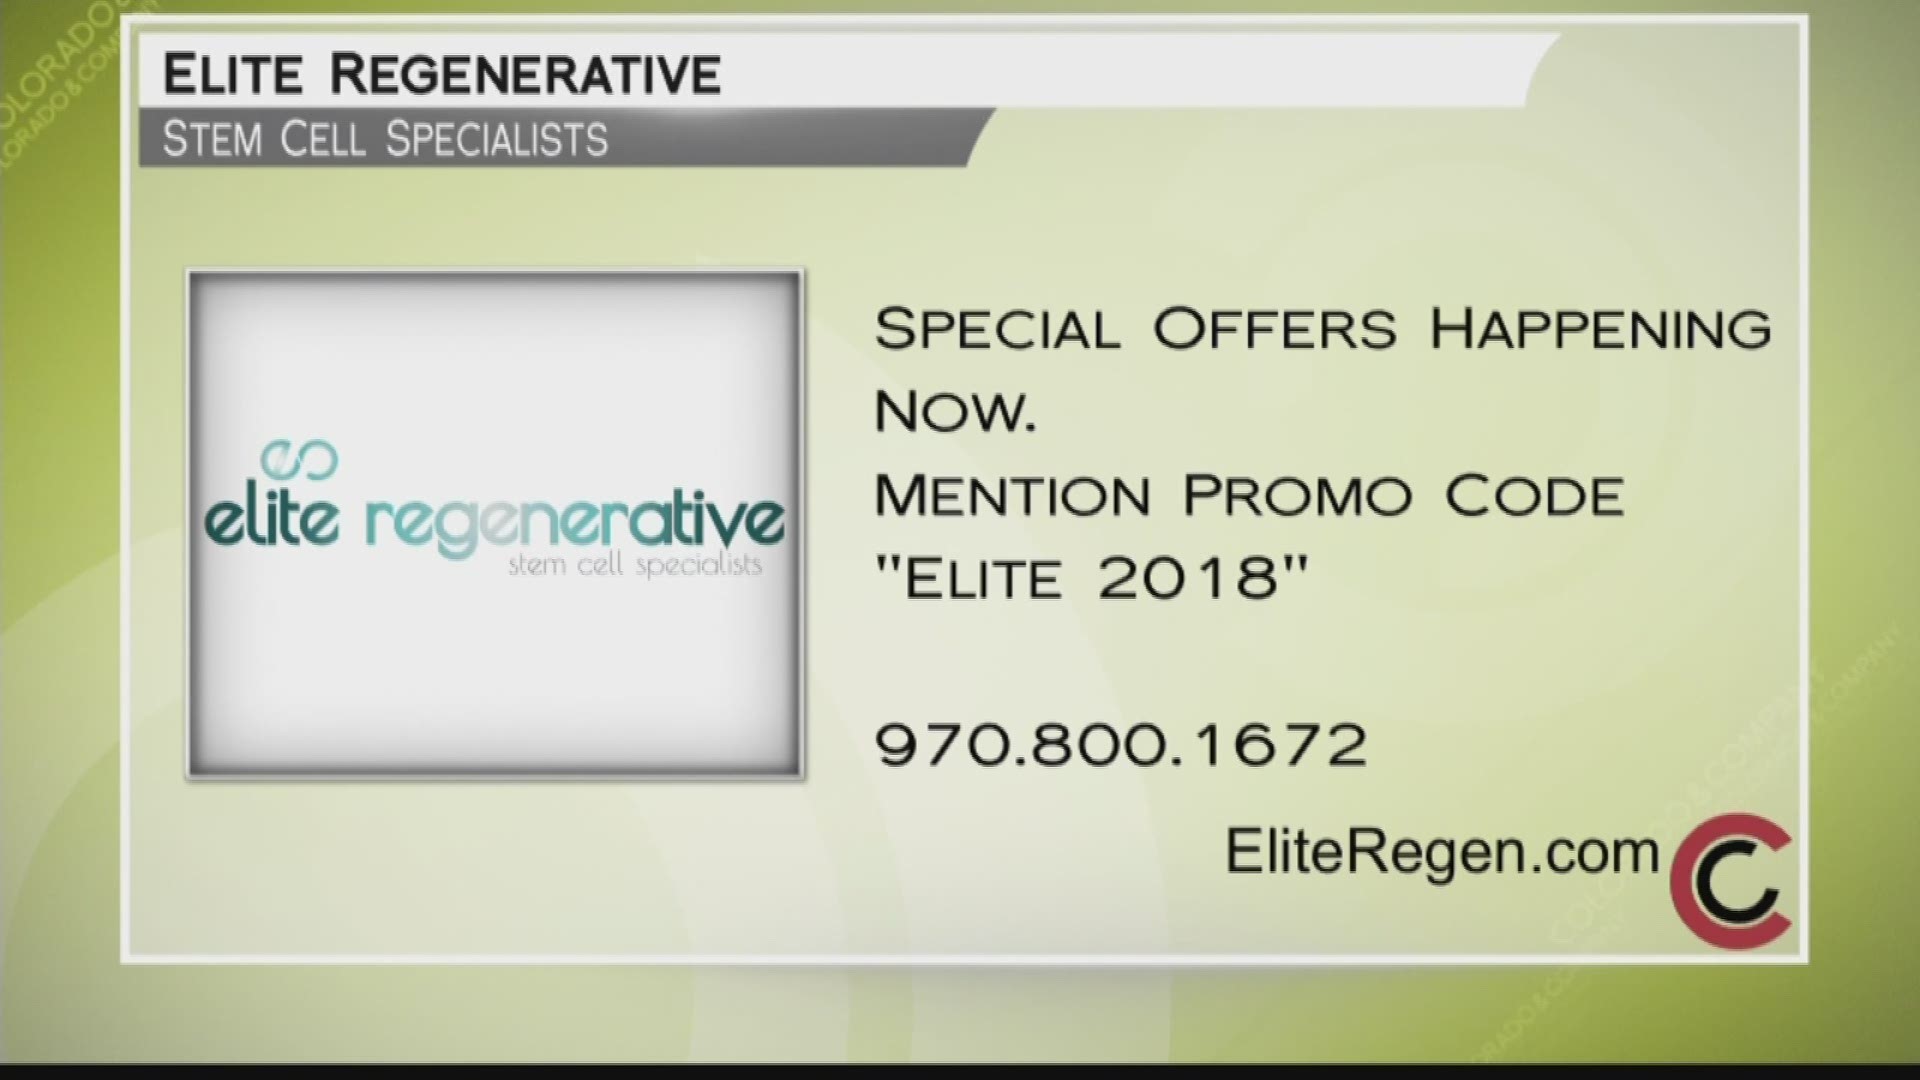 If you are curious about Stem Cell Treatments for you or a loved one, give Elite Regenerative Stem Cell Specialists a call today&mdash;970.800.1672. Find out about treatment options and take advantage of special offers. Just mention the promo code ELITE 2018 when you call. Get more info online at www.EliteRegen.com. THIS INTERVIEW HAS COMMERCIAL CONTENT. PRODUCTS AND SERVICES FEATURED APPEAR AS PAID ADVERTISING.